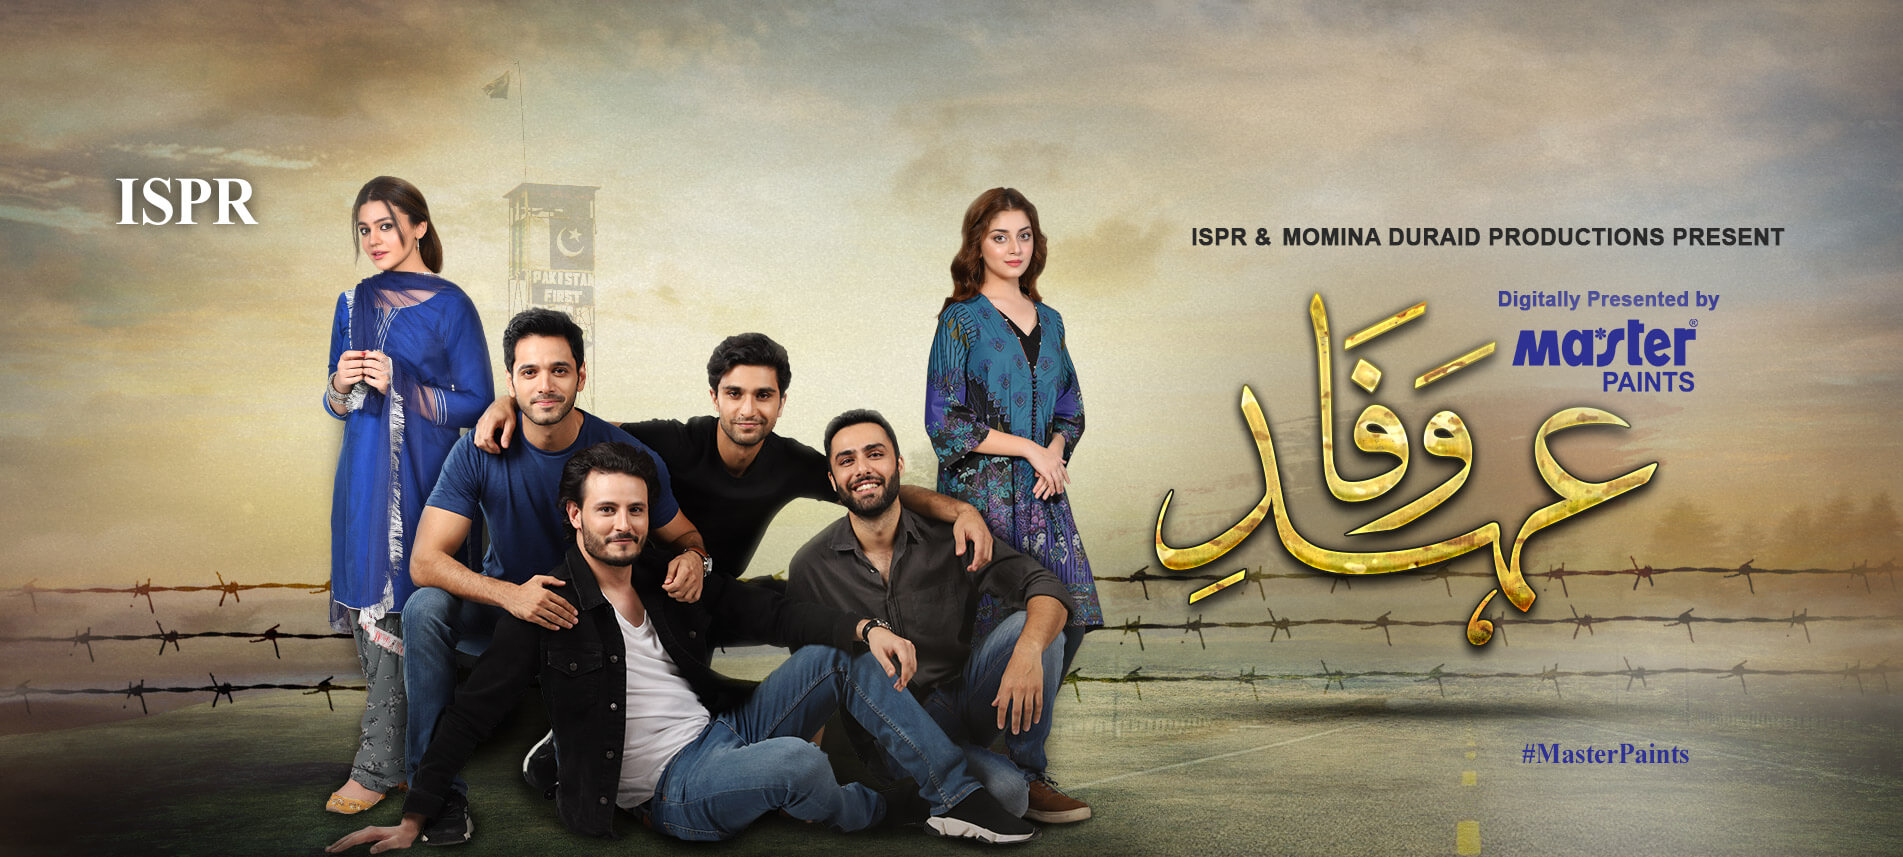 Ehd-e-Wafa's last episode to be screened in cinemas on 14 March